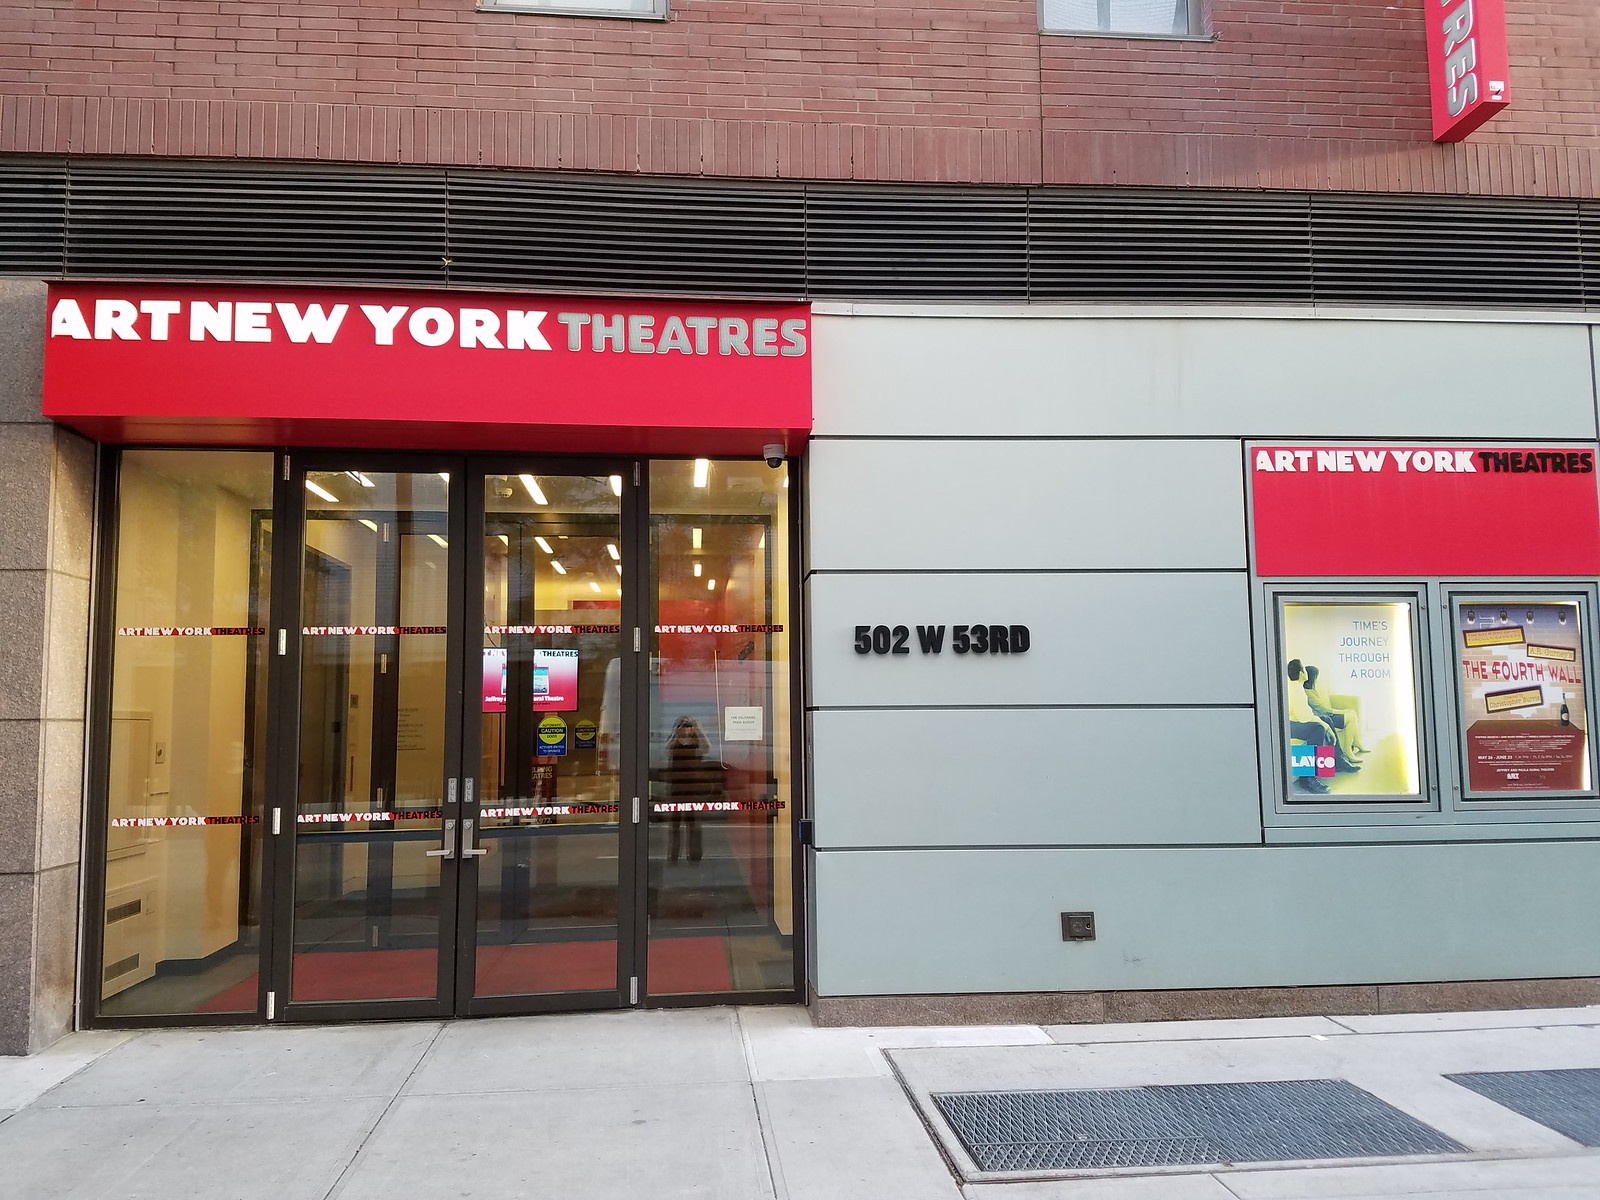 The exterior of the A.R.T./New York Theatres.